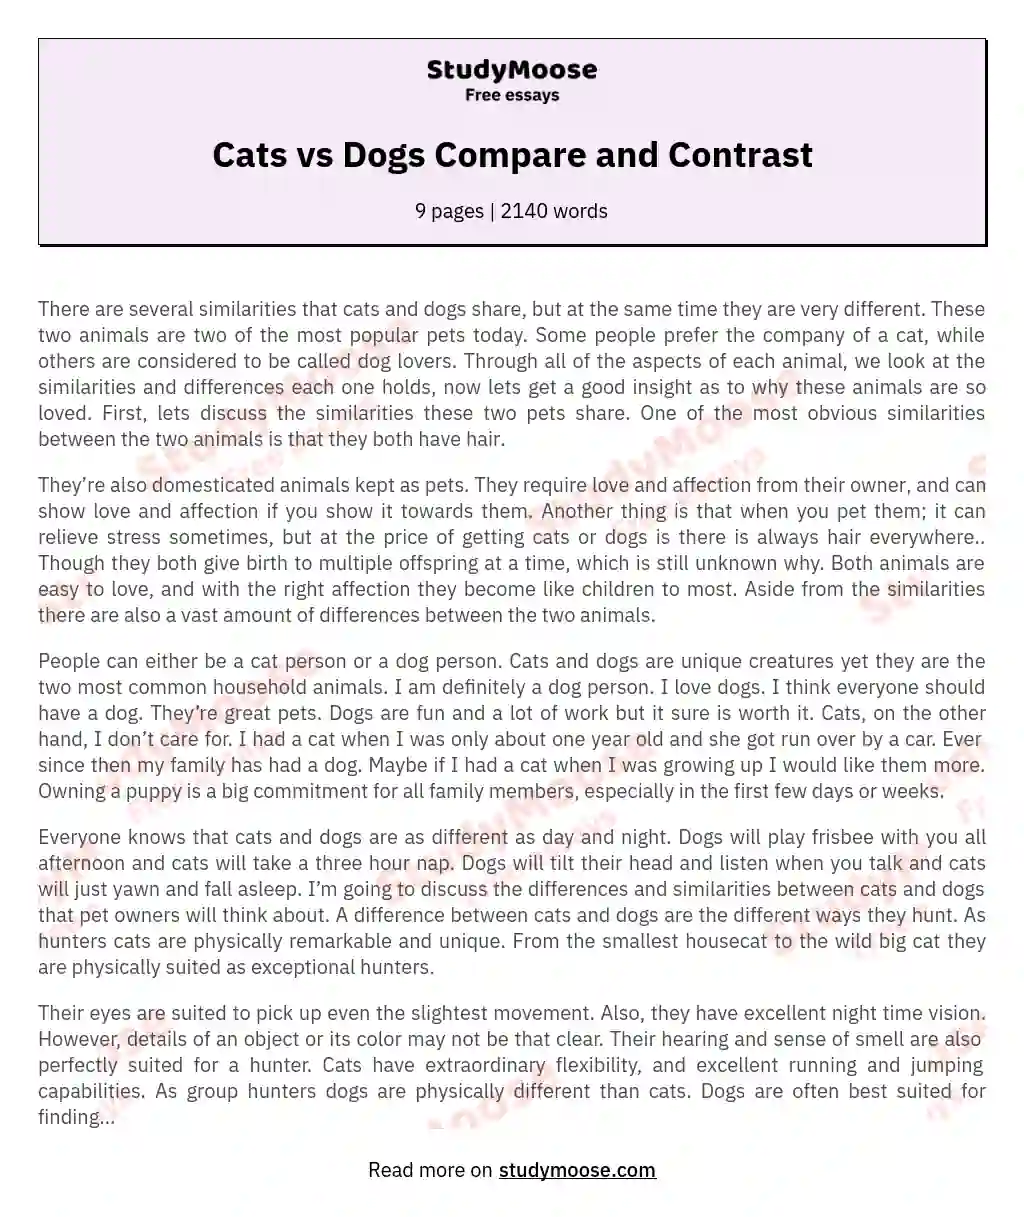 Cats vs Dogs Compare and Contrast